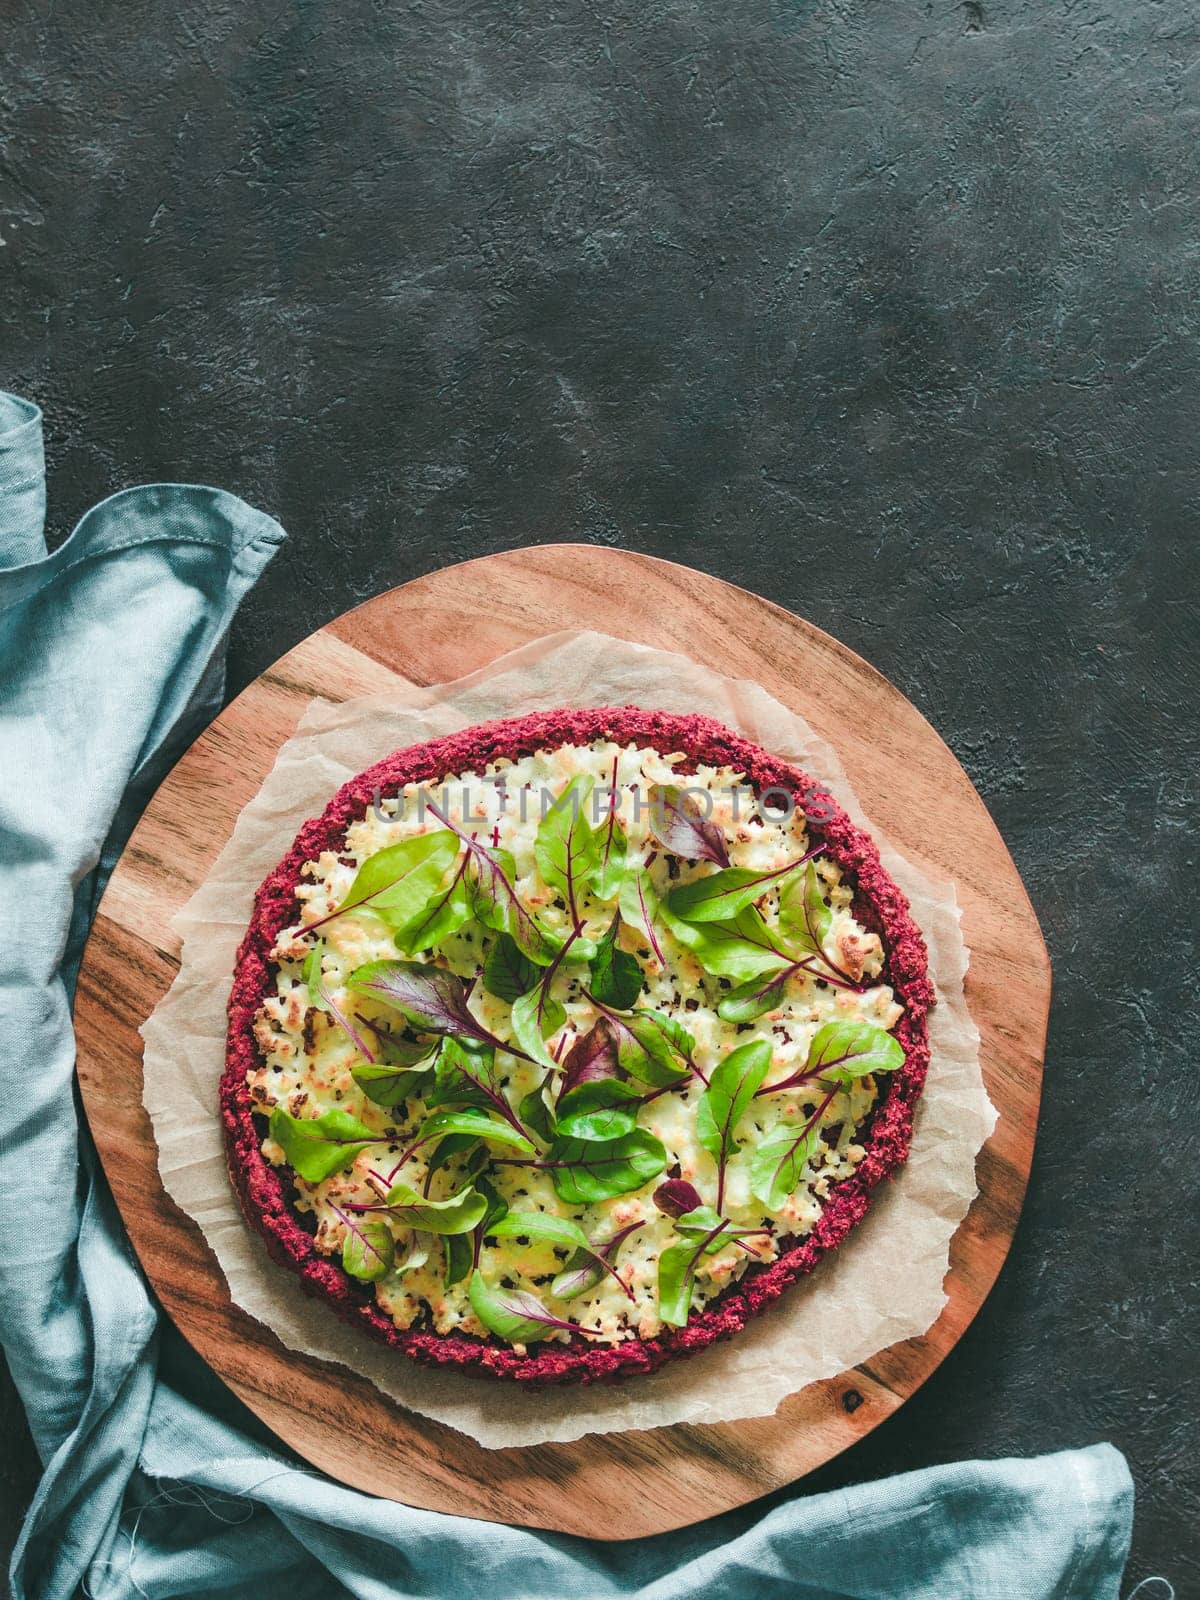 beetroot pizza crust with fresh swiss chard or mangold beetroot leaves.Ideas and recipes for healthy vegan snack.Egg-free pizza crust with chia seed and wholegrain brown rice flour.Copy space.Top view